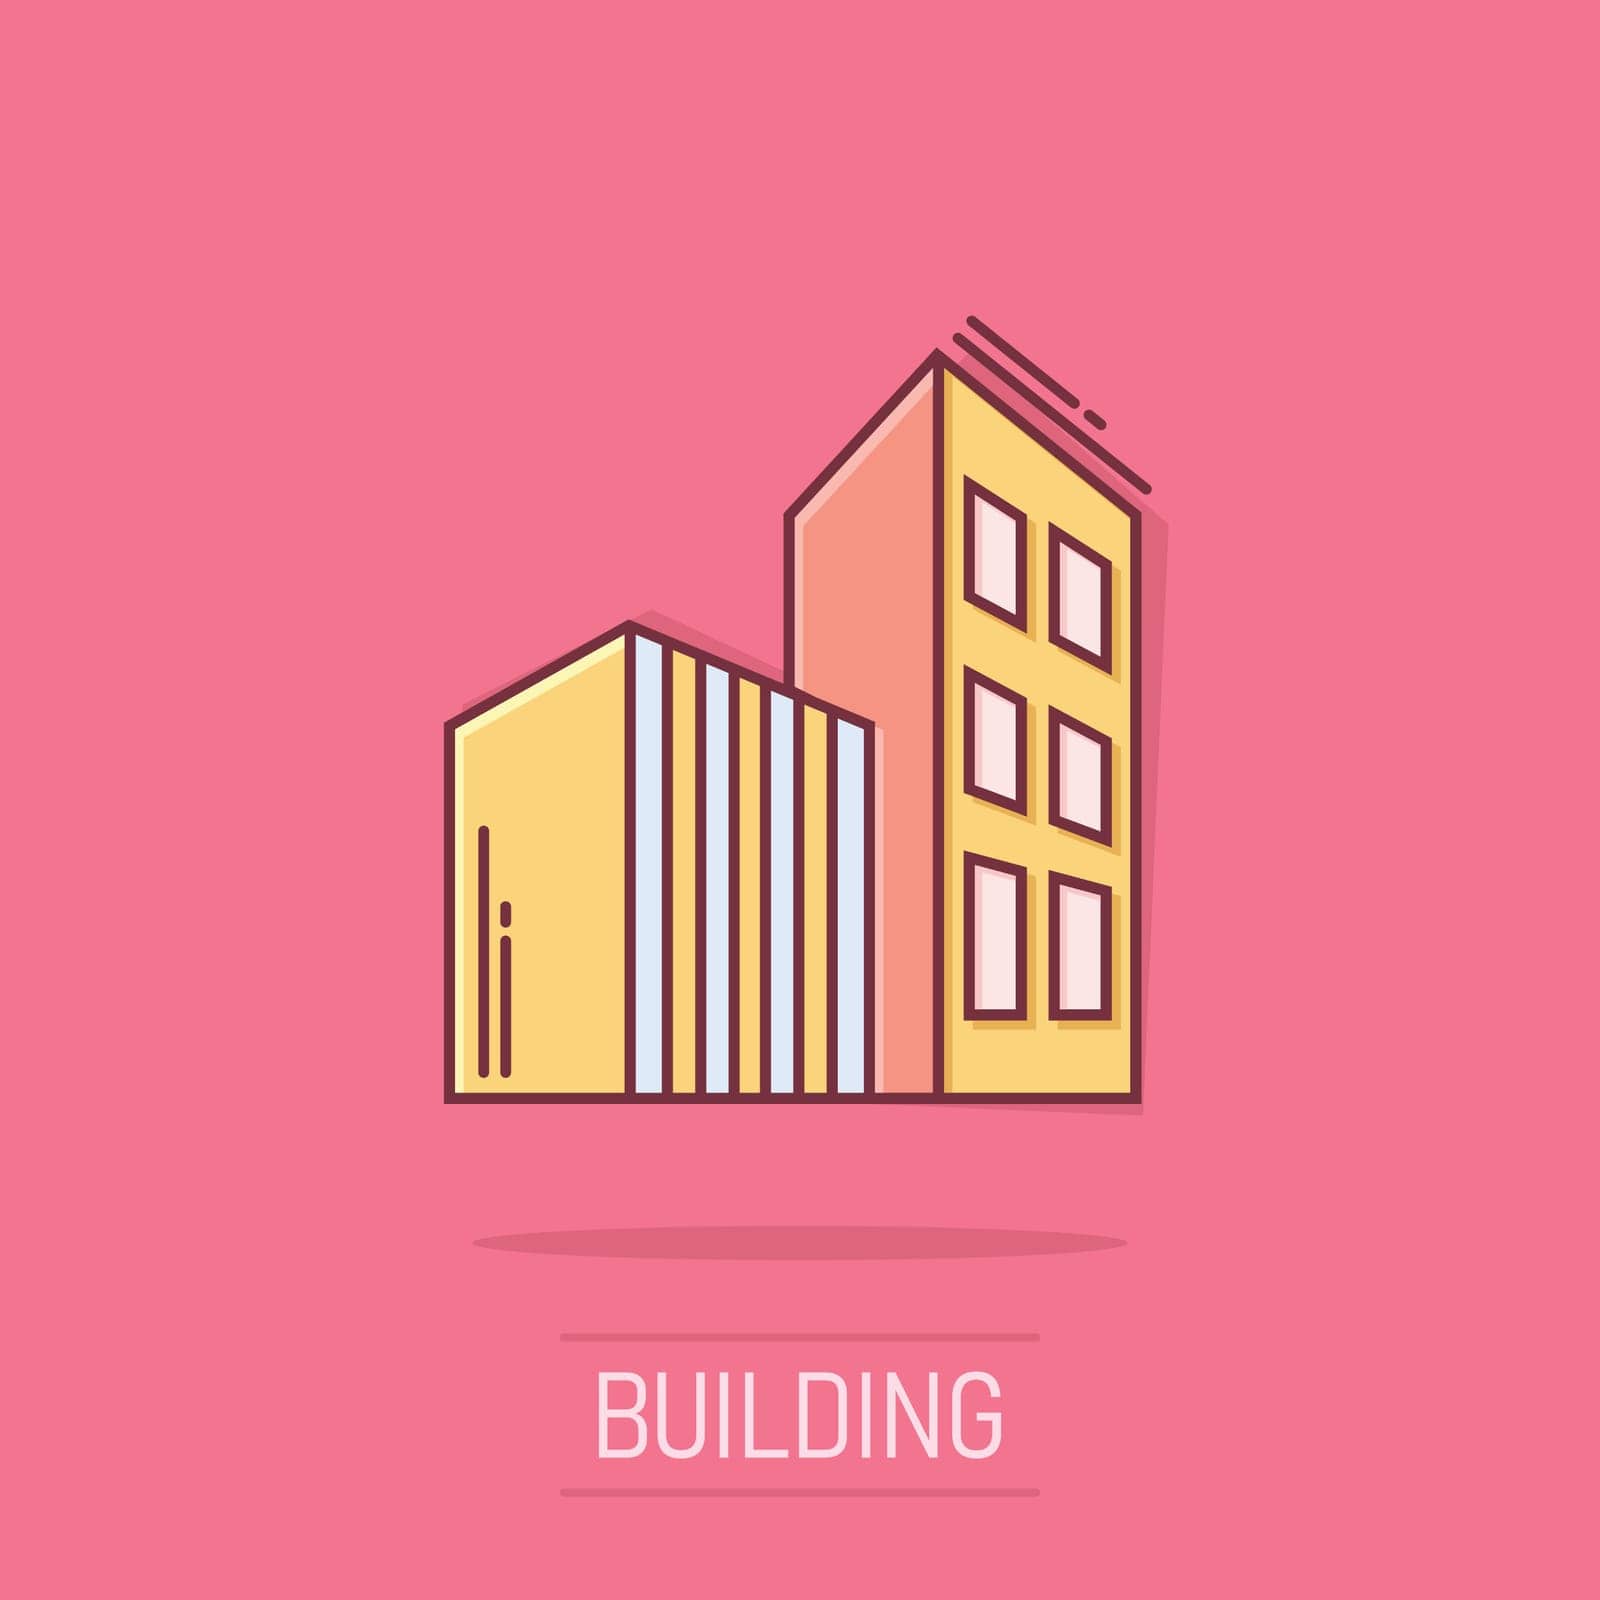 Building icon in comic style. Skyscraper cartoon vector illustration on white isolated background. Architecture splash effect business concept. by LysenkoA